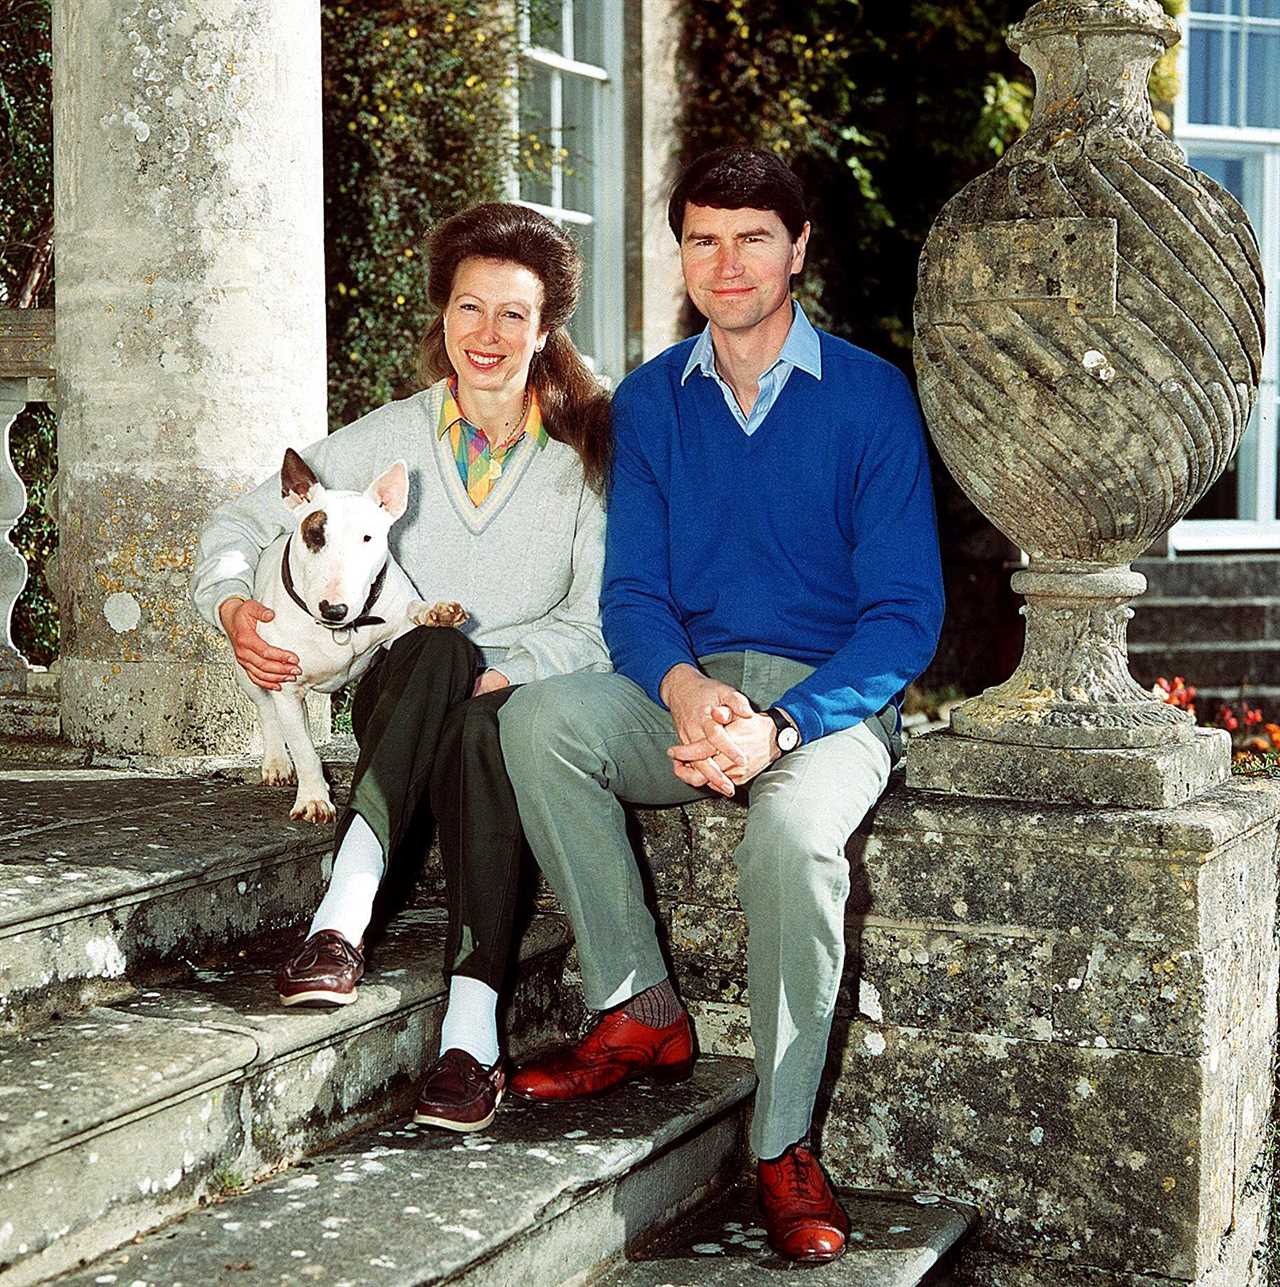 Inside Princess Anne’s country estate where she lives alongside Zara and Mike Tindall and even ex-husbands are welcome